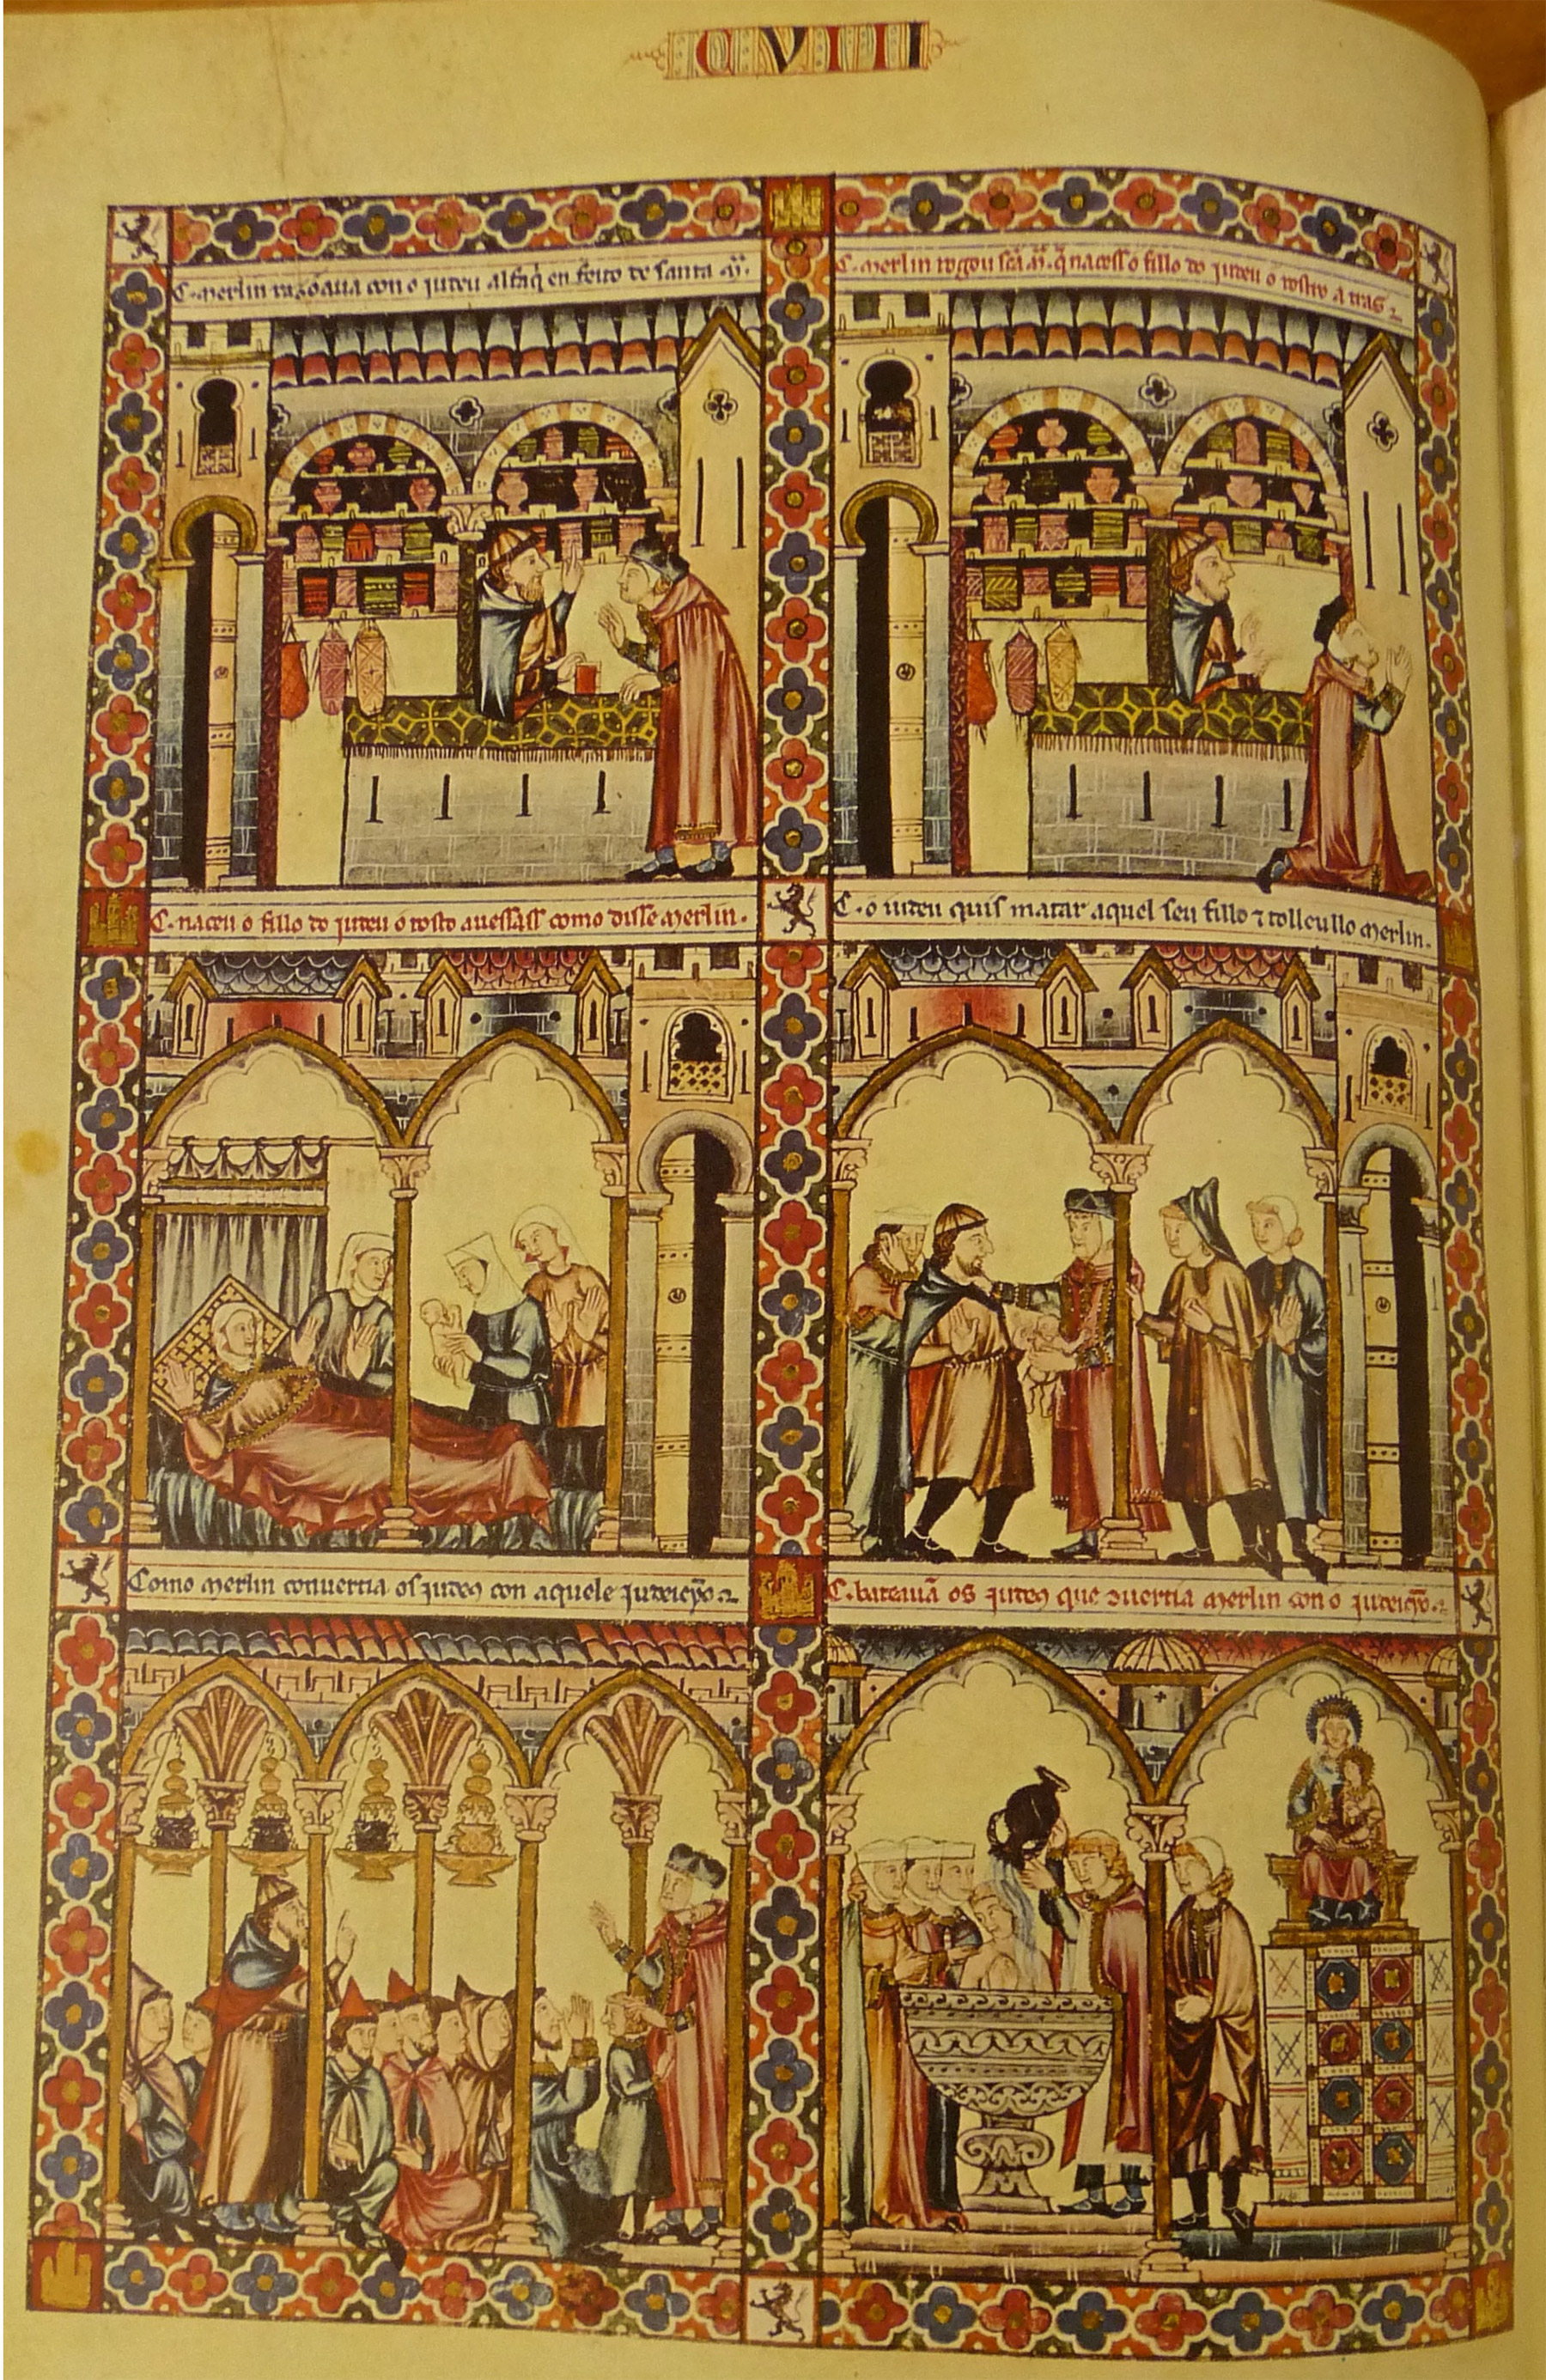 Conversion scene in Cantiga no. 108 depicted in six panels